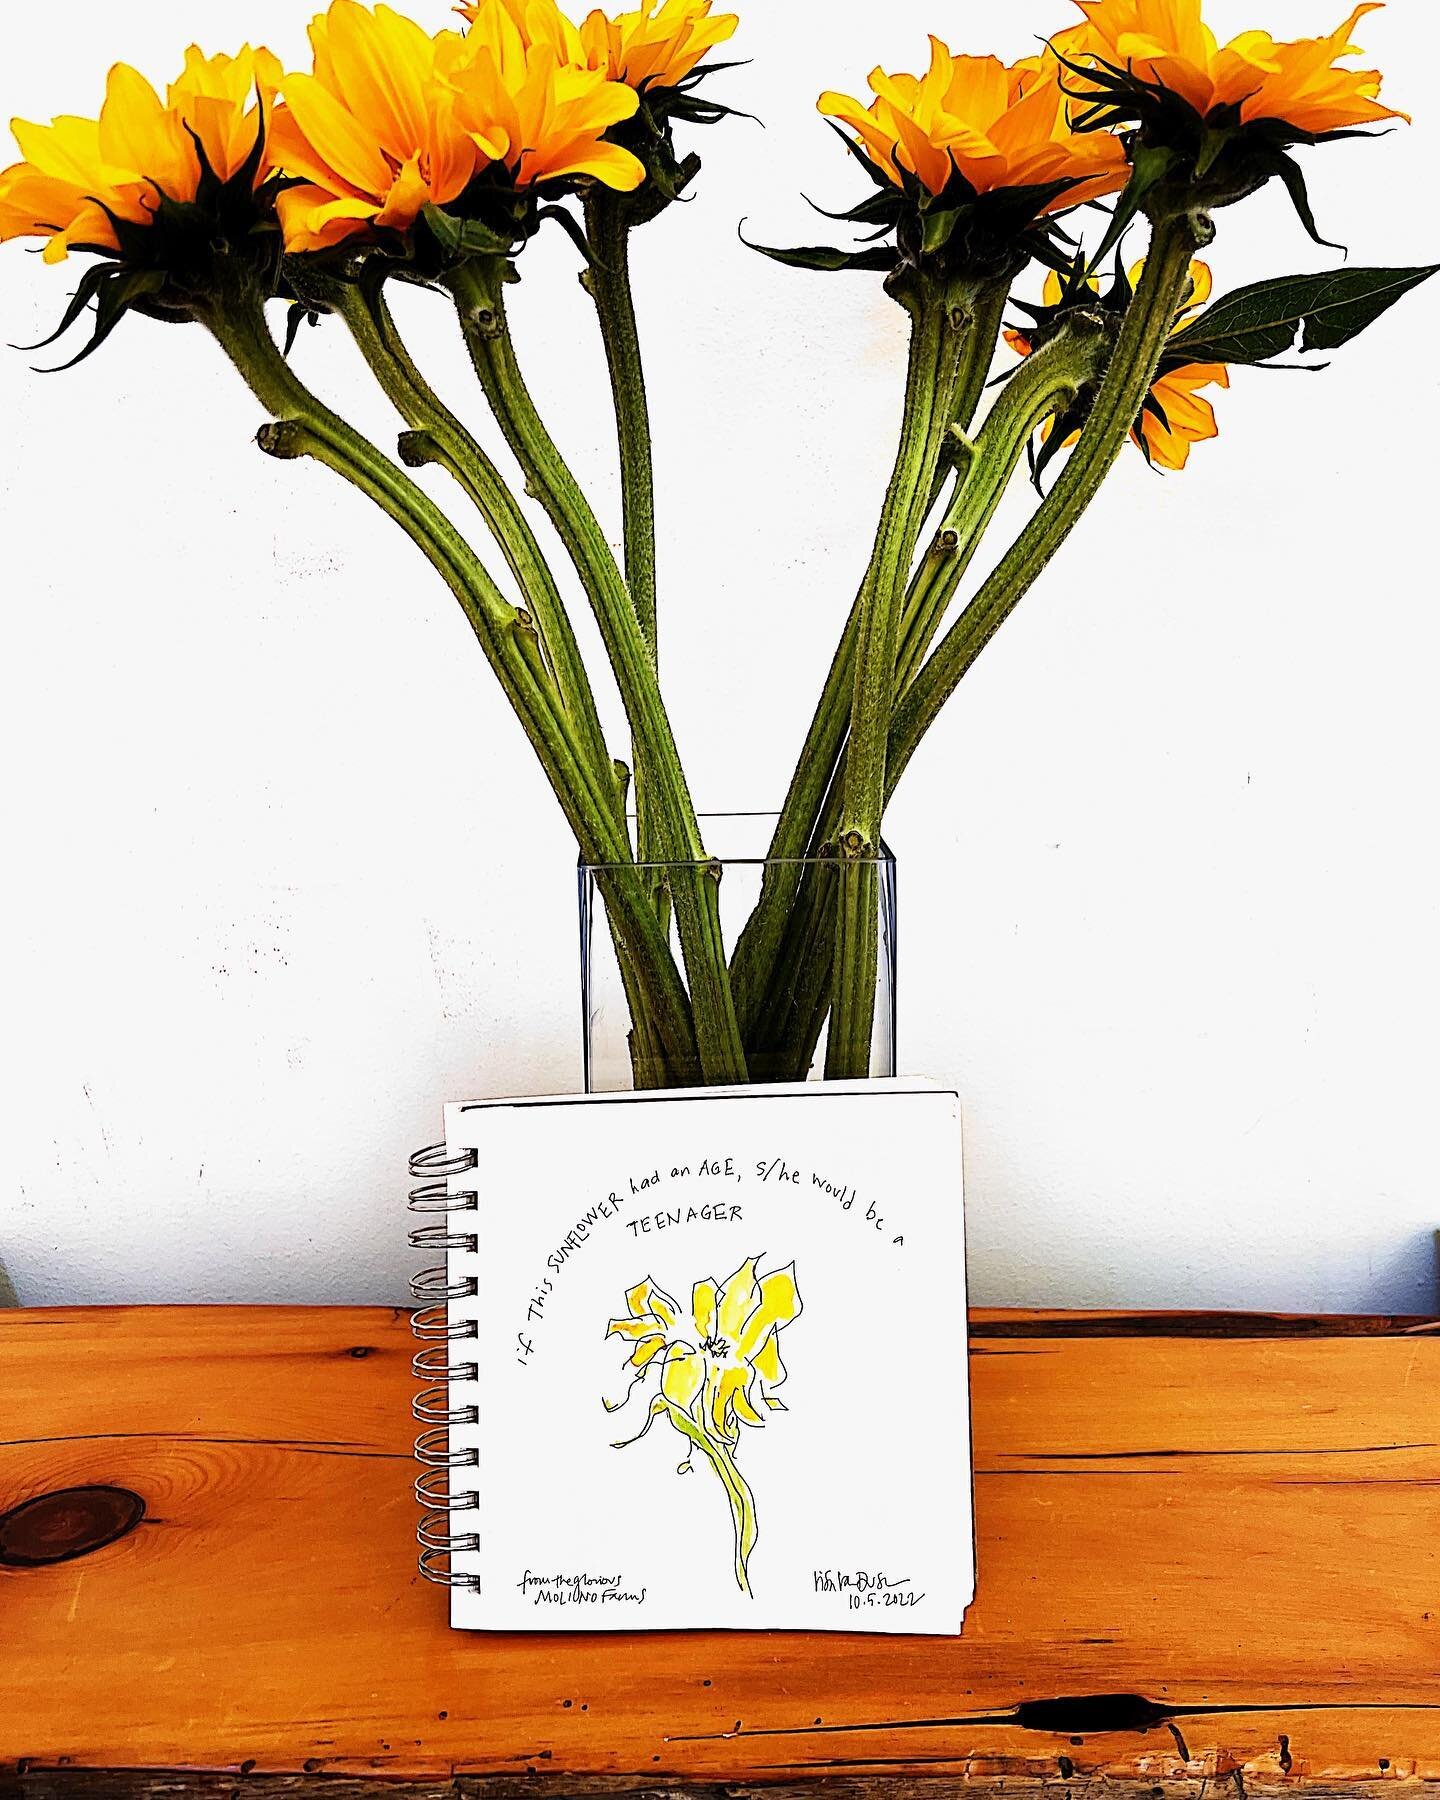 These are especially long and lively sunflowers. Somehow they seem like teenagers to me - in the best sense! These are from the lovely Molino Farms on the coast. 
.
.
.
#sunflower #sunflowers #teenagers #dailysketch #farmersmarket #paloalto #molinocr